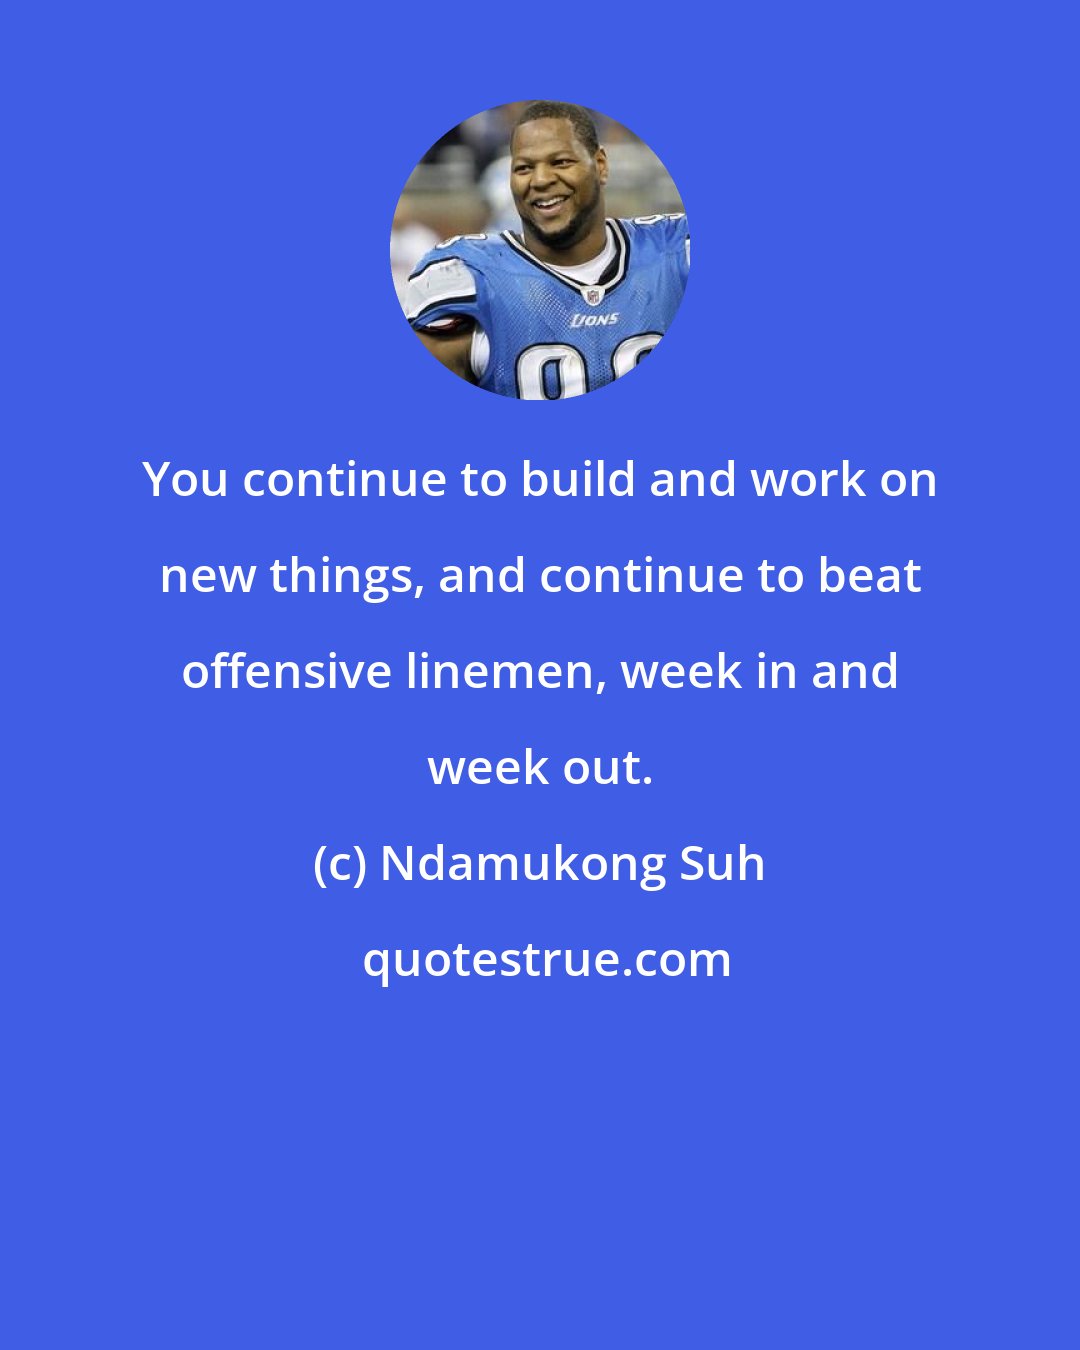 Ndamukong Suh: You continue to build and work on new things, and continue to beat offensive linemen, week in and week out.